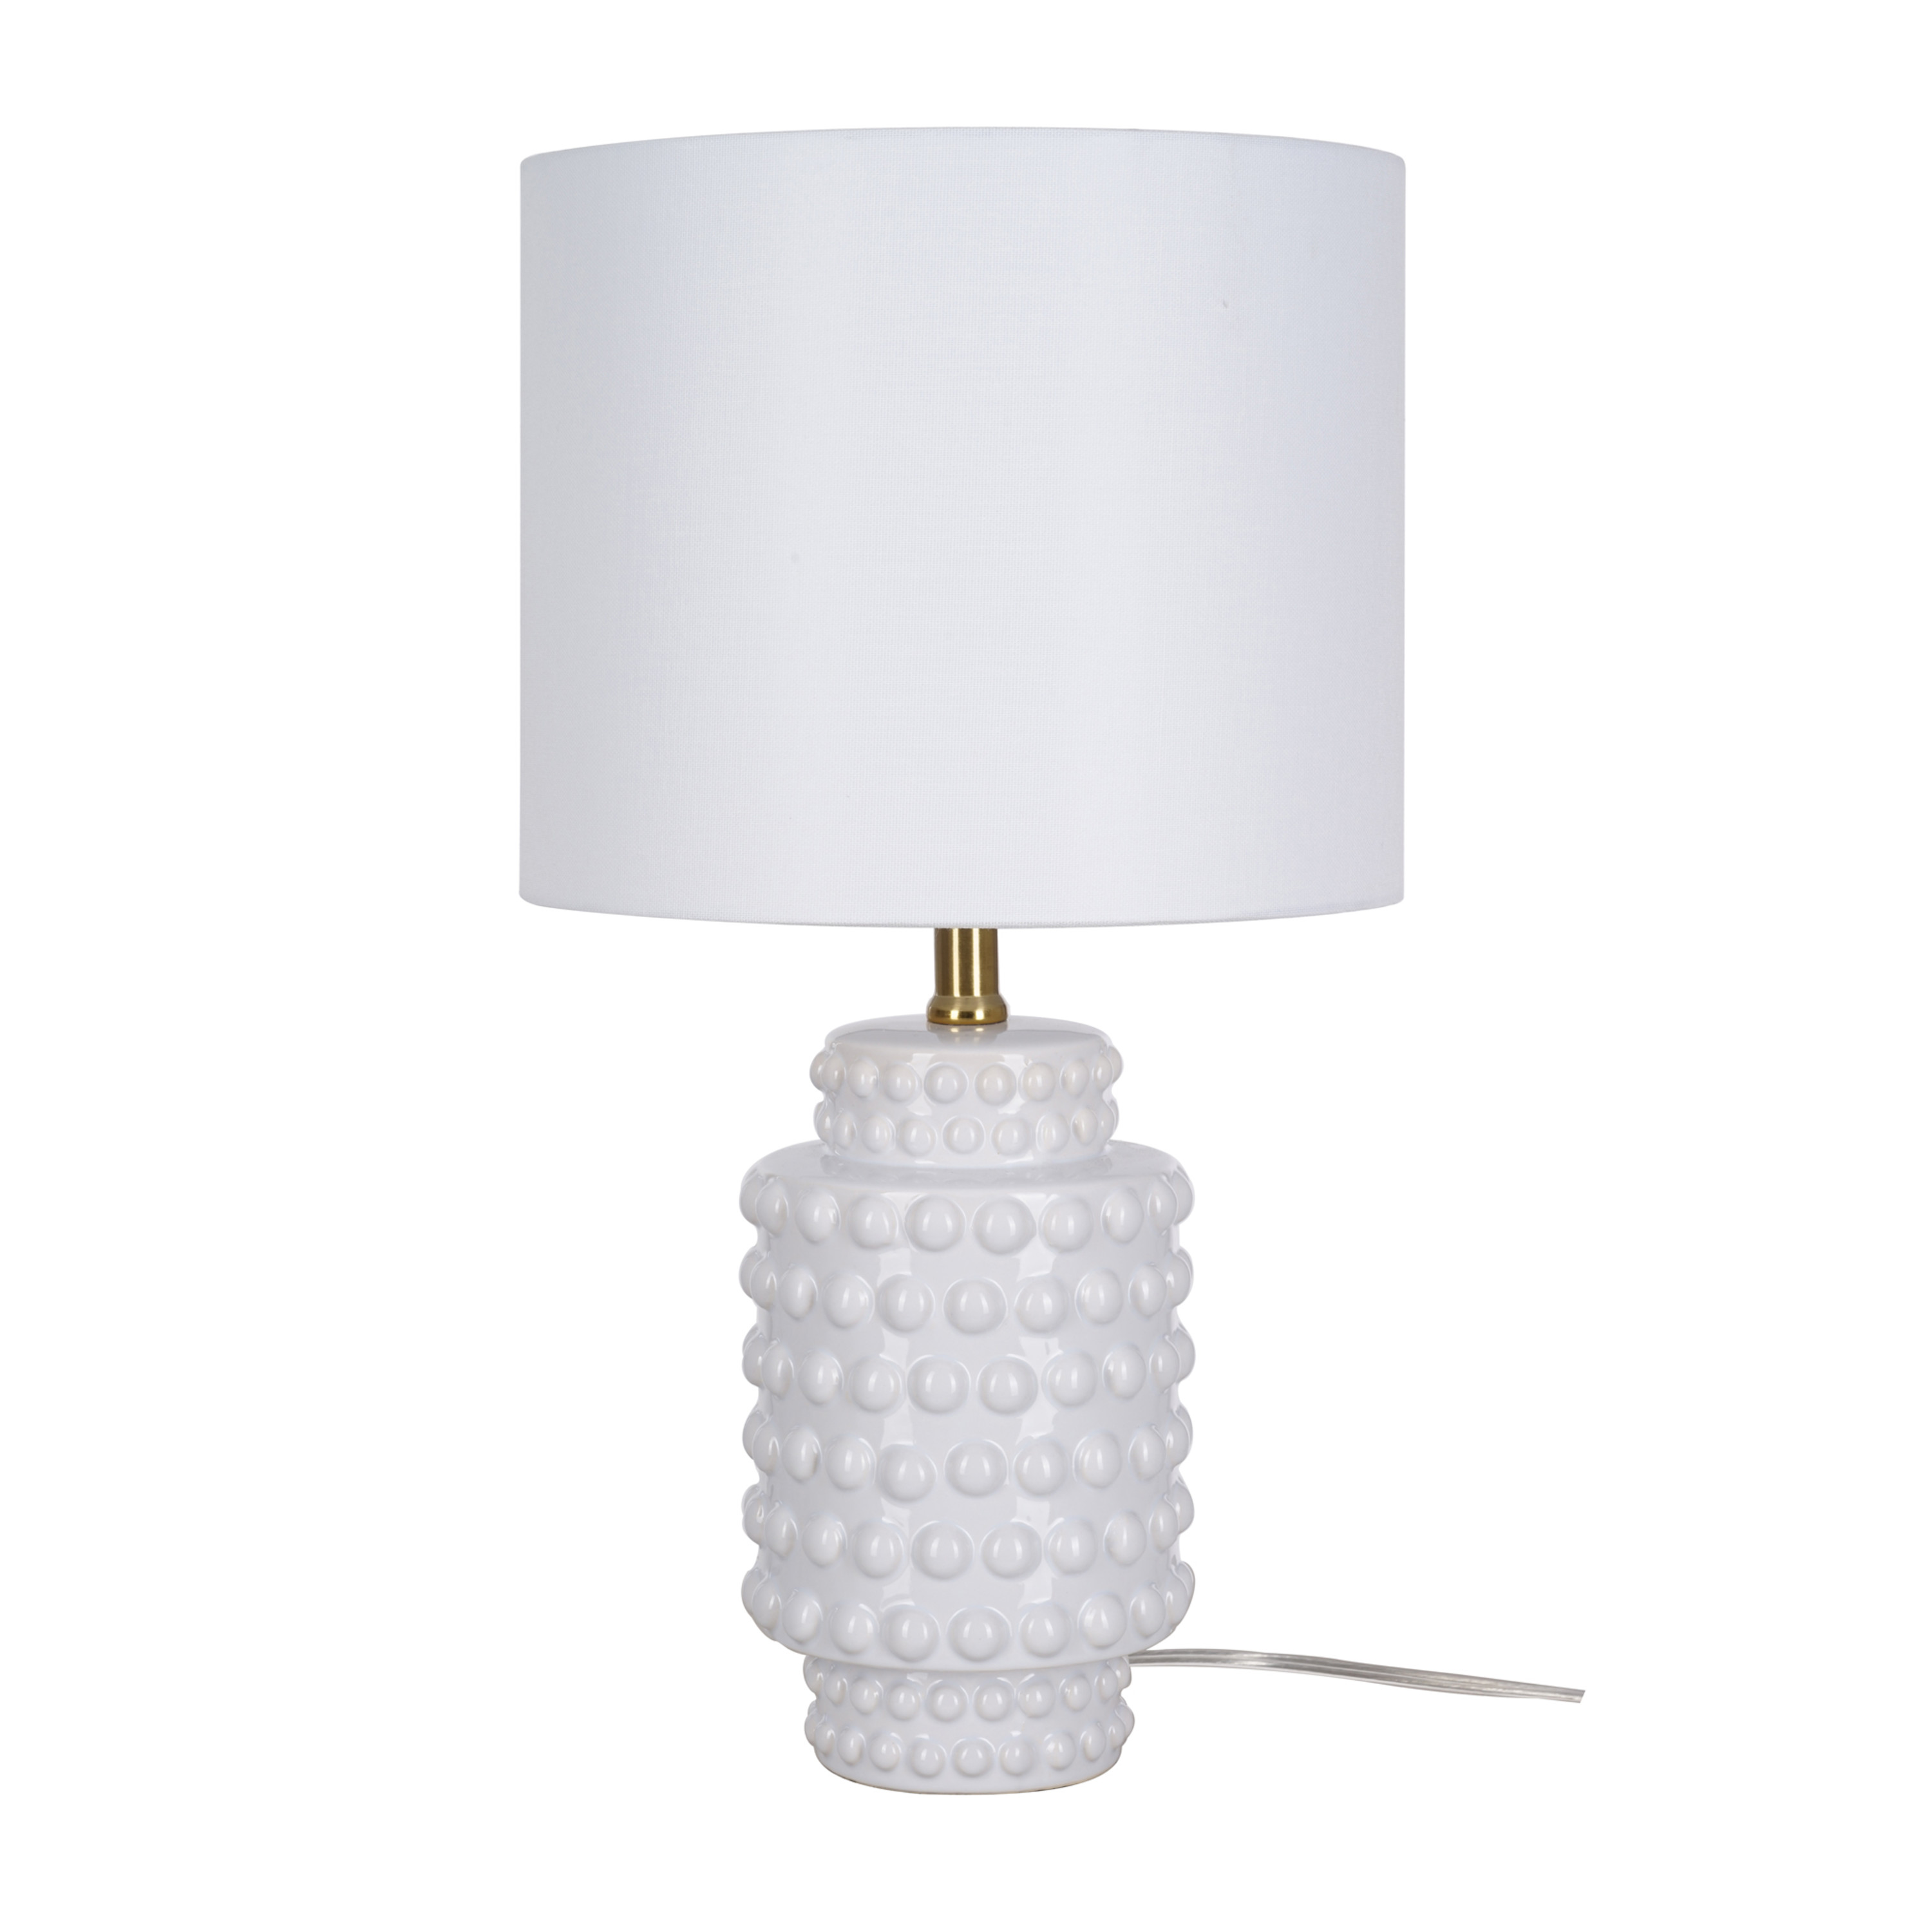 My Texas House 21" Hob-Nail Ceramic Table Lamp, Brass Accents, White Finish, LED Bulb Included - image 2 of 8